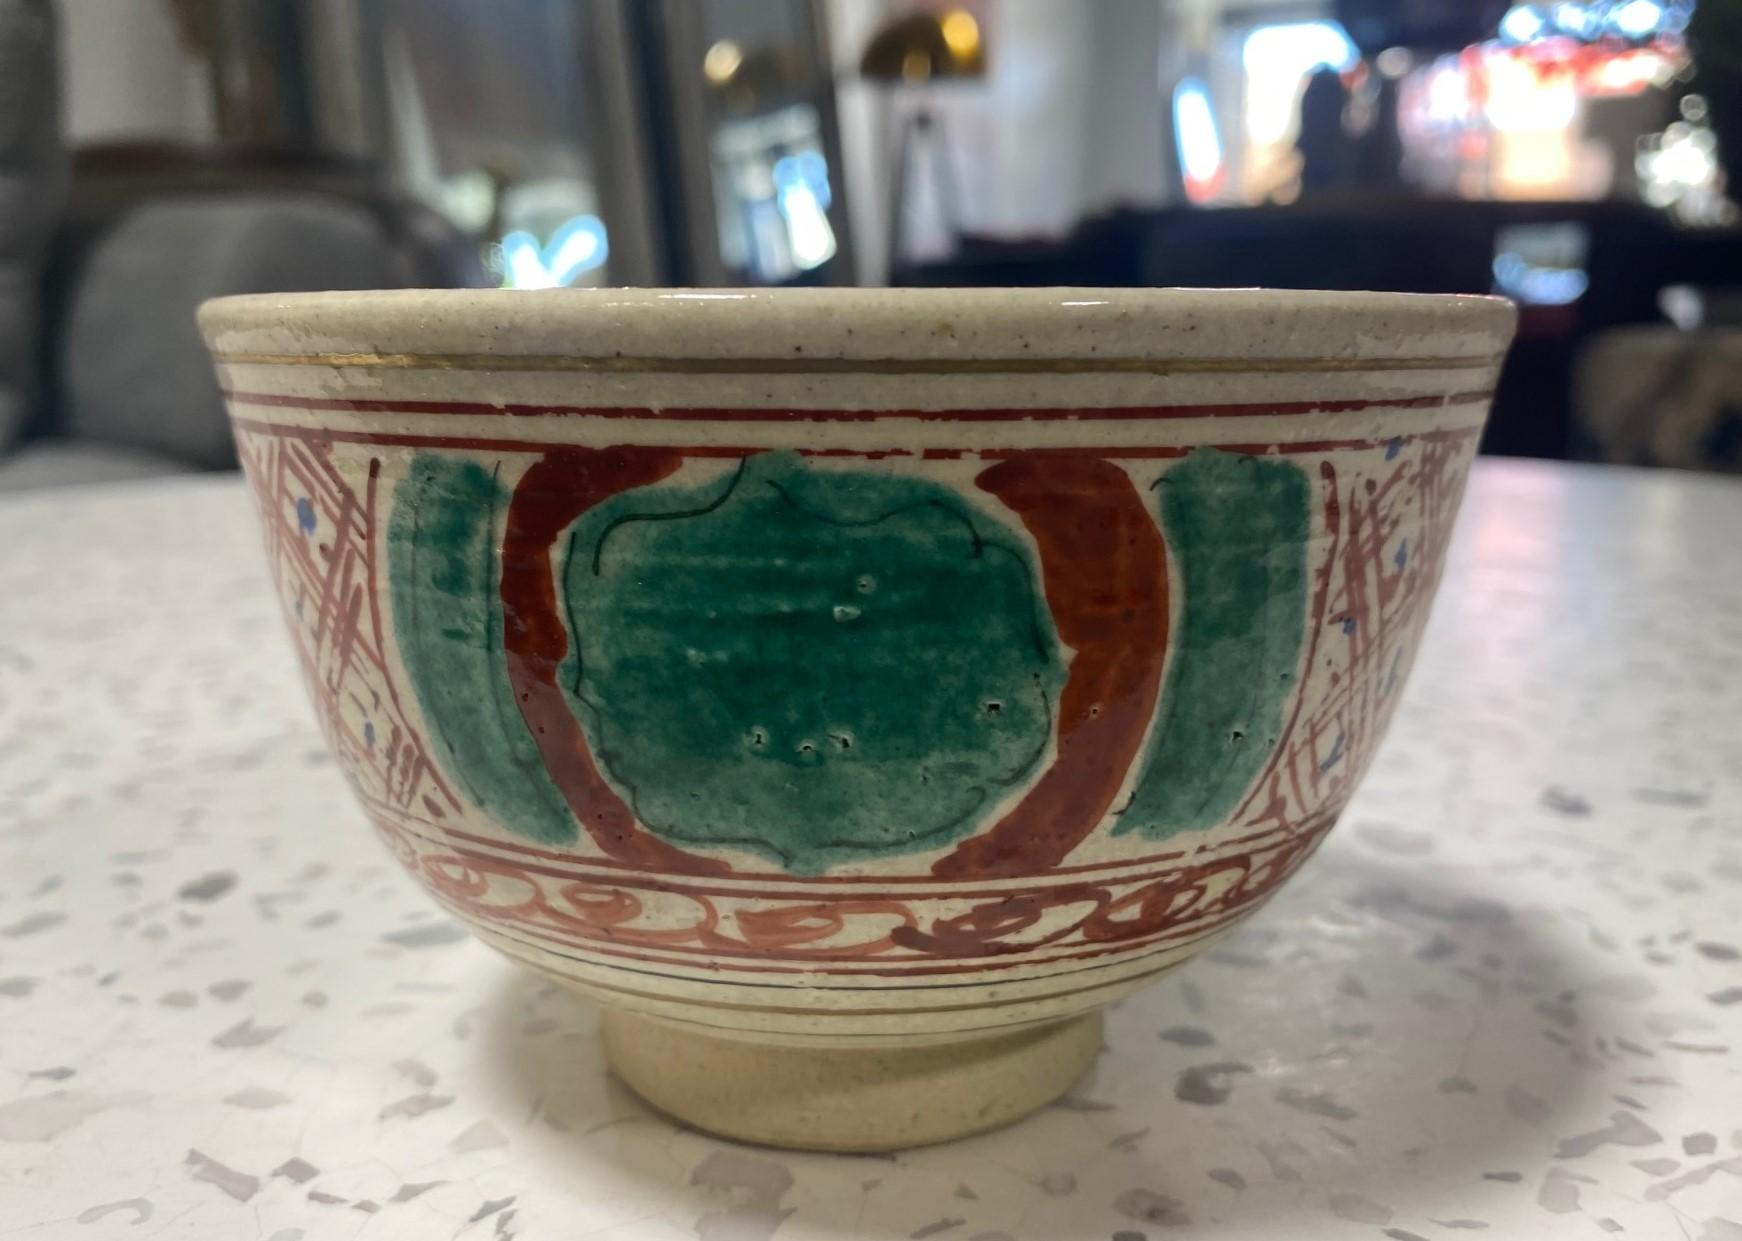 An absolutely gorgeous hand-painted pottery Chawan tea bowl by Japanese master potter Kitaoji Rosanjin (1883-1959) who was arguably one of if not the greatest artists/ceramicists of the 20th century. Rosanjin (whose real name was Kitaoji Fusajiro.